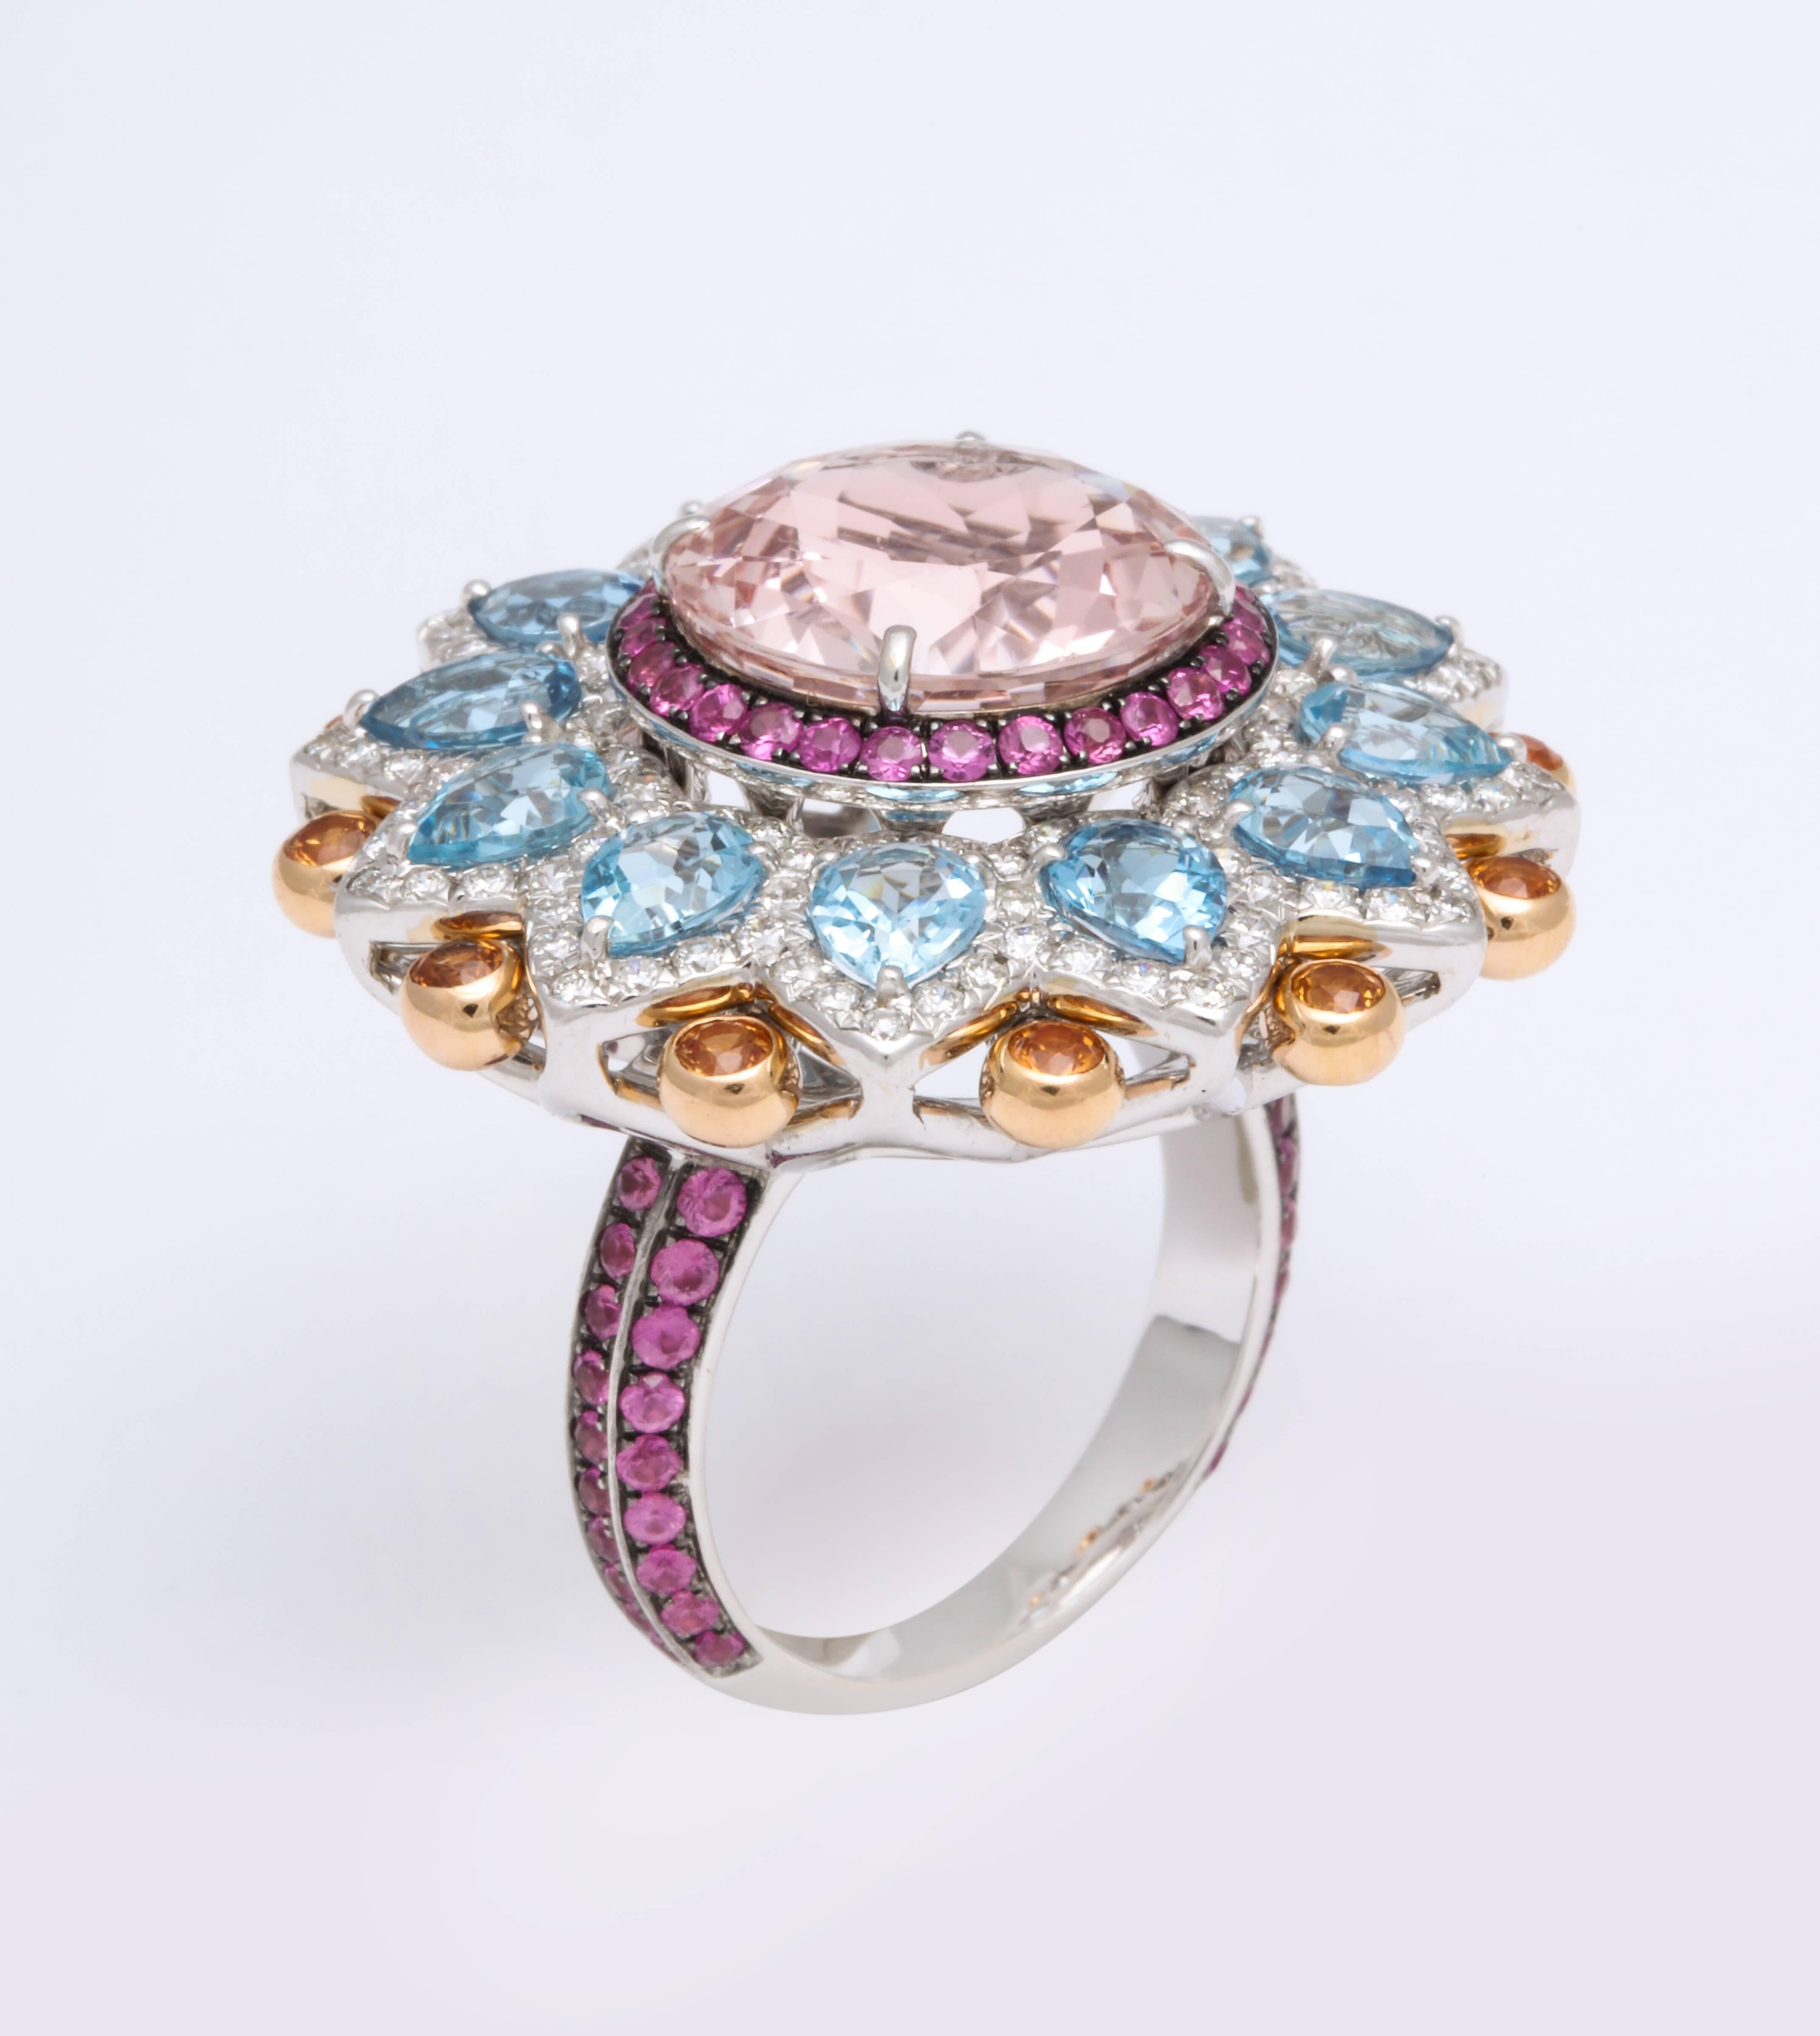 18K White Gold, Kaleidoscopic configuration Ballerina ring mounted with central pink champagne Kunzite in a round pink Sapphire halo, with gently sloped radiating pear shaped Aquamarine, and round brilliant cut orange Sapphires, framed within a